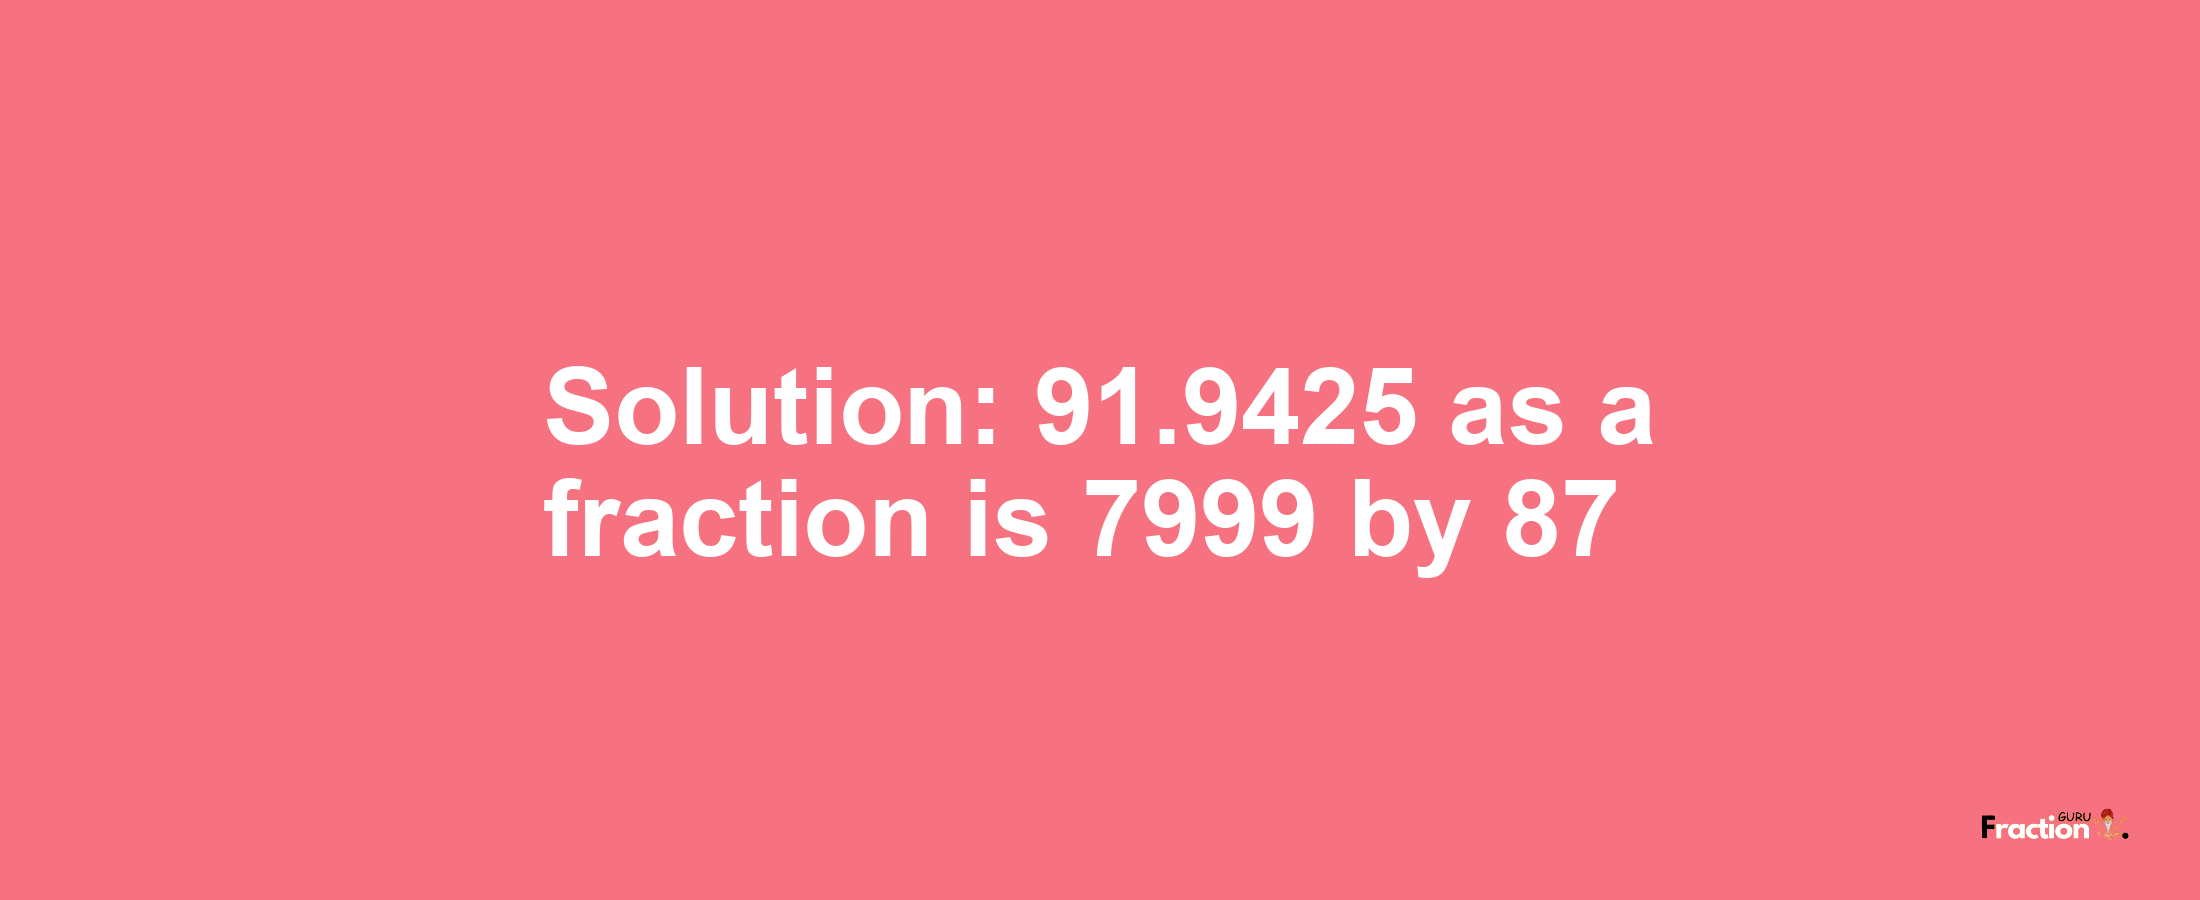 Solution:91.9425 as a fraction is 7999/87